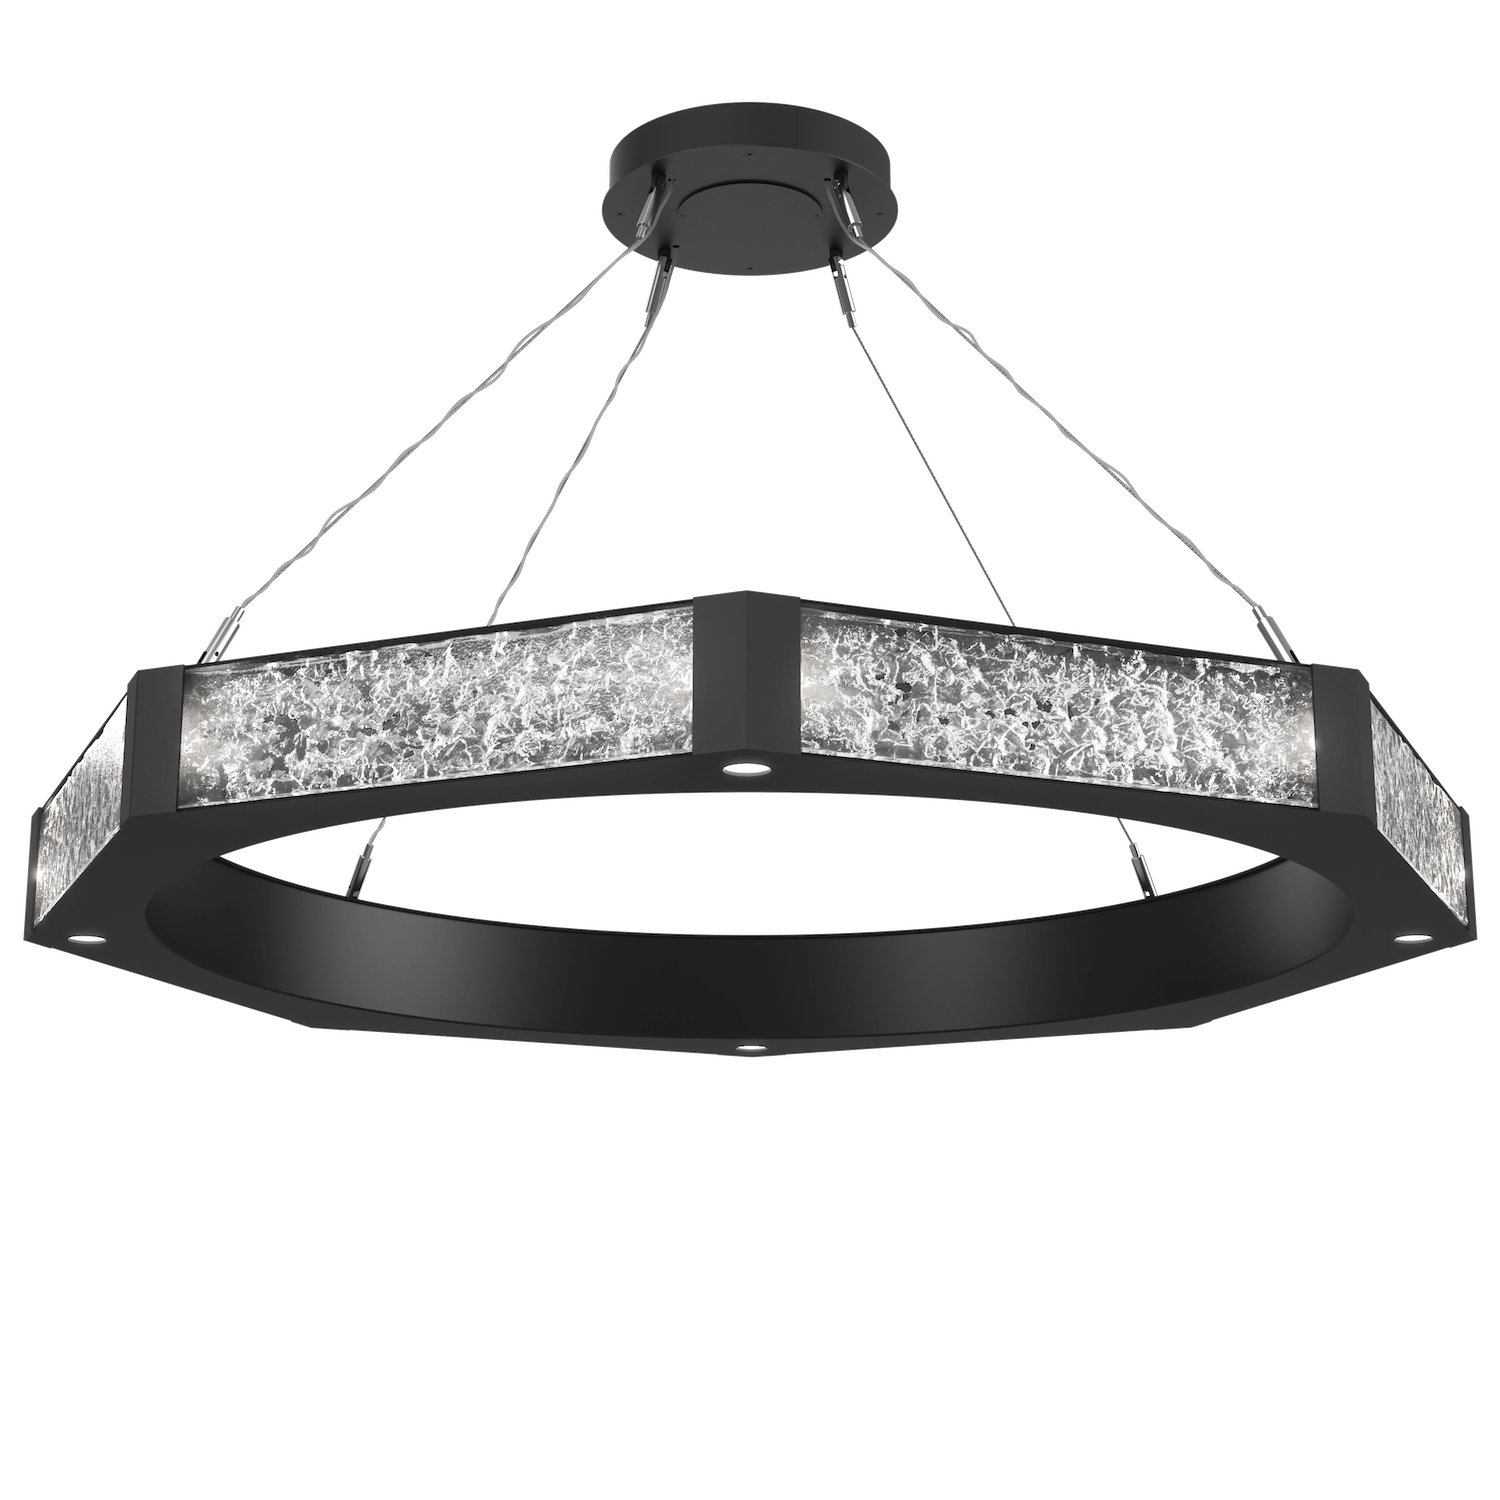 CHB0061-48-MB-GC-Hammerton-Studio-Glacier-48-inch-ring-chandelier-with-matte-black-finish-and-clear-blown-glass-with-geo-clear-cast-glass-diffusers-and-LED-lamping